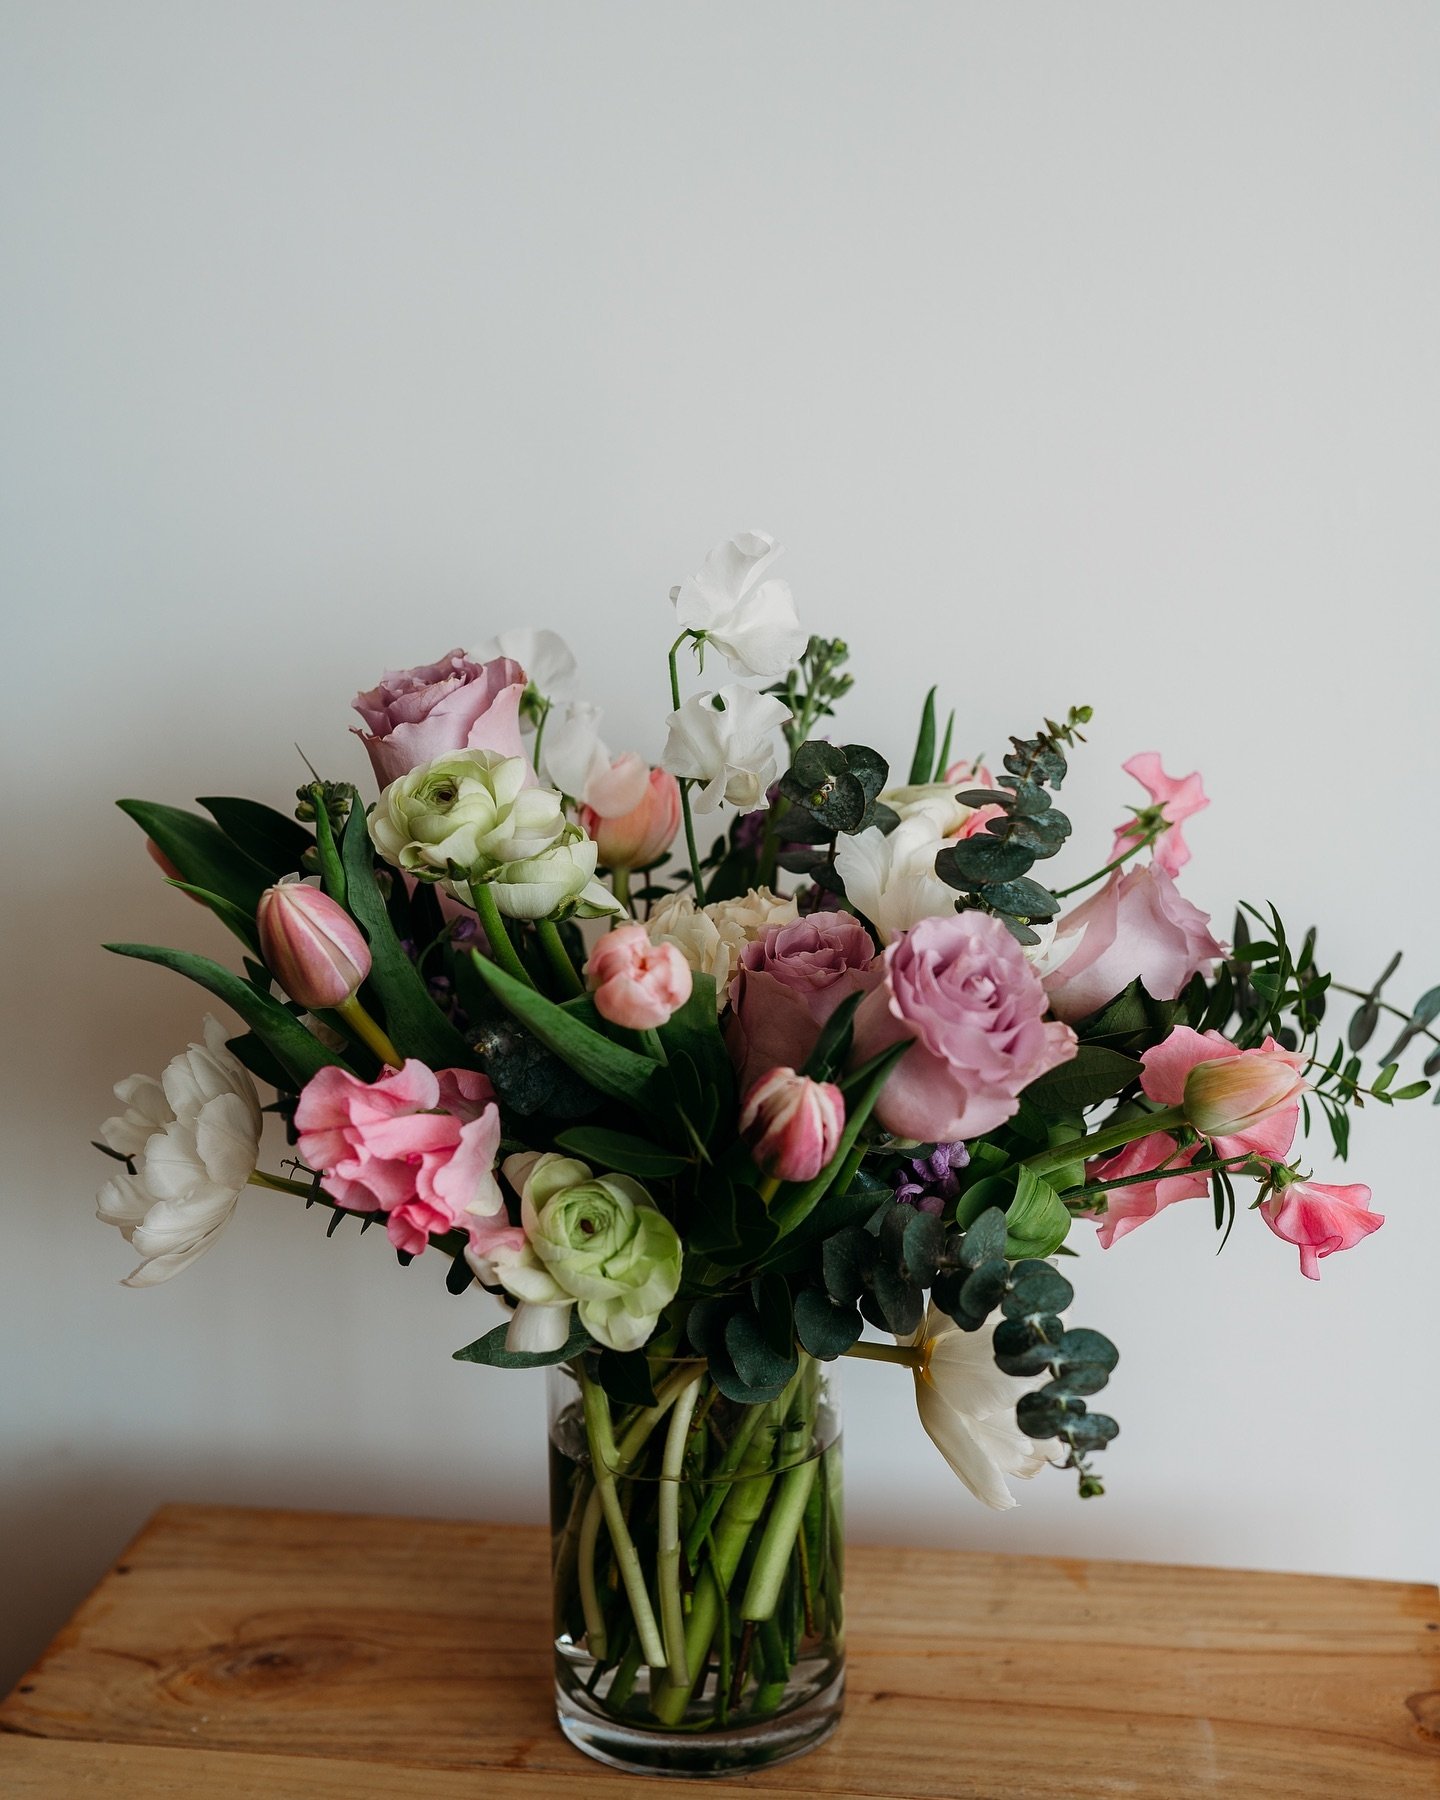 Hi lovelies! Please don&rsquo;t forget to pre-order your flowers for Mother&rsquo;s Day! It&rsquo;s a huge help for planning purposes, and while we will have some grab and go bouquets available that weekend with pre-orders you can make sure you get t